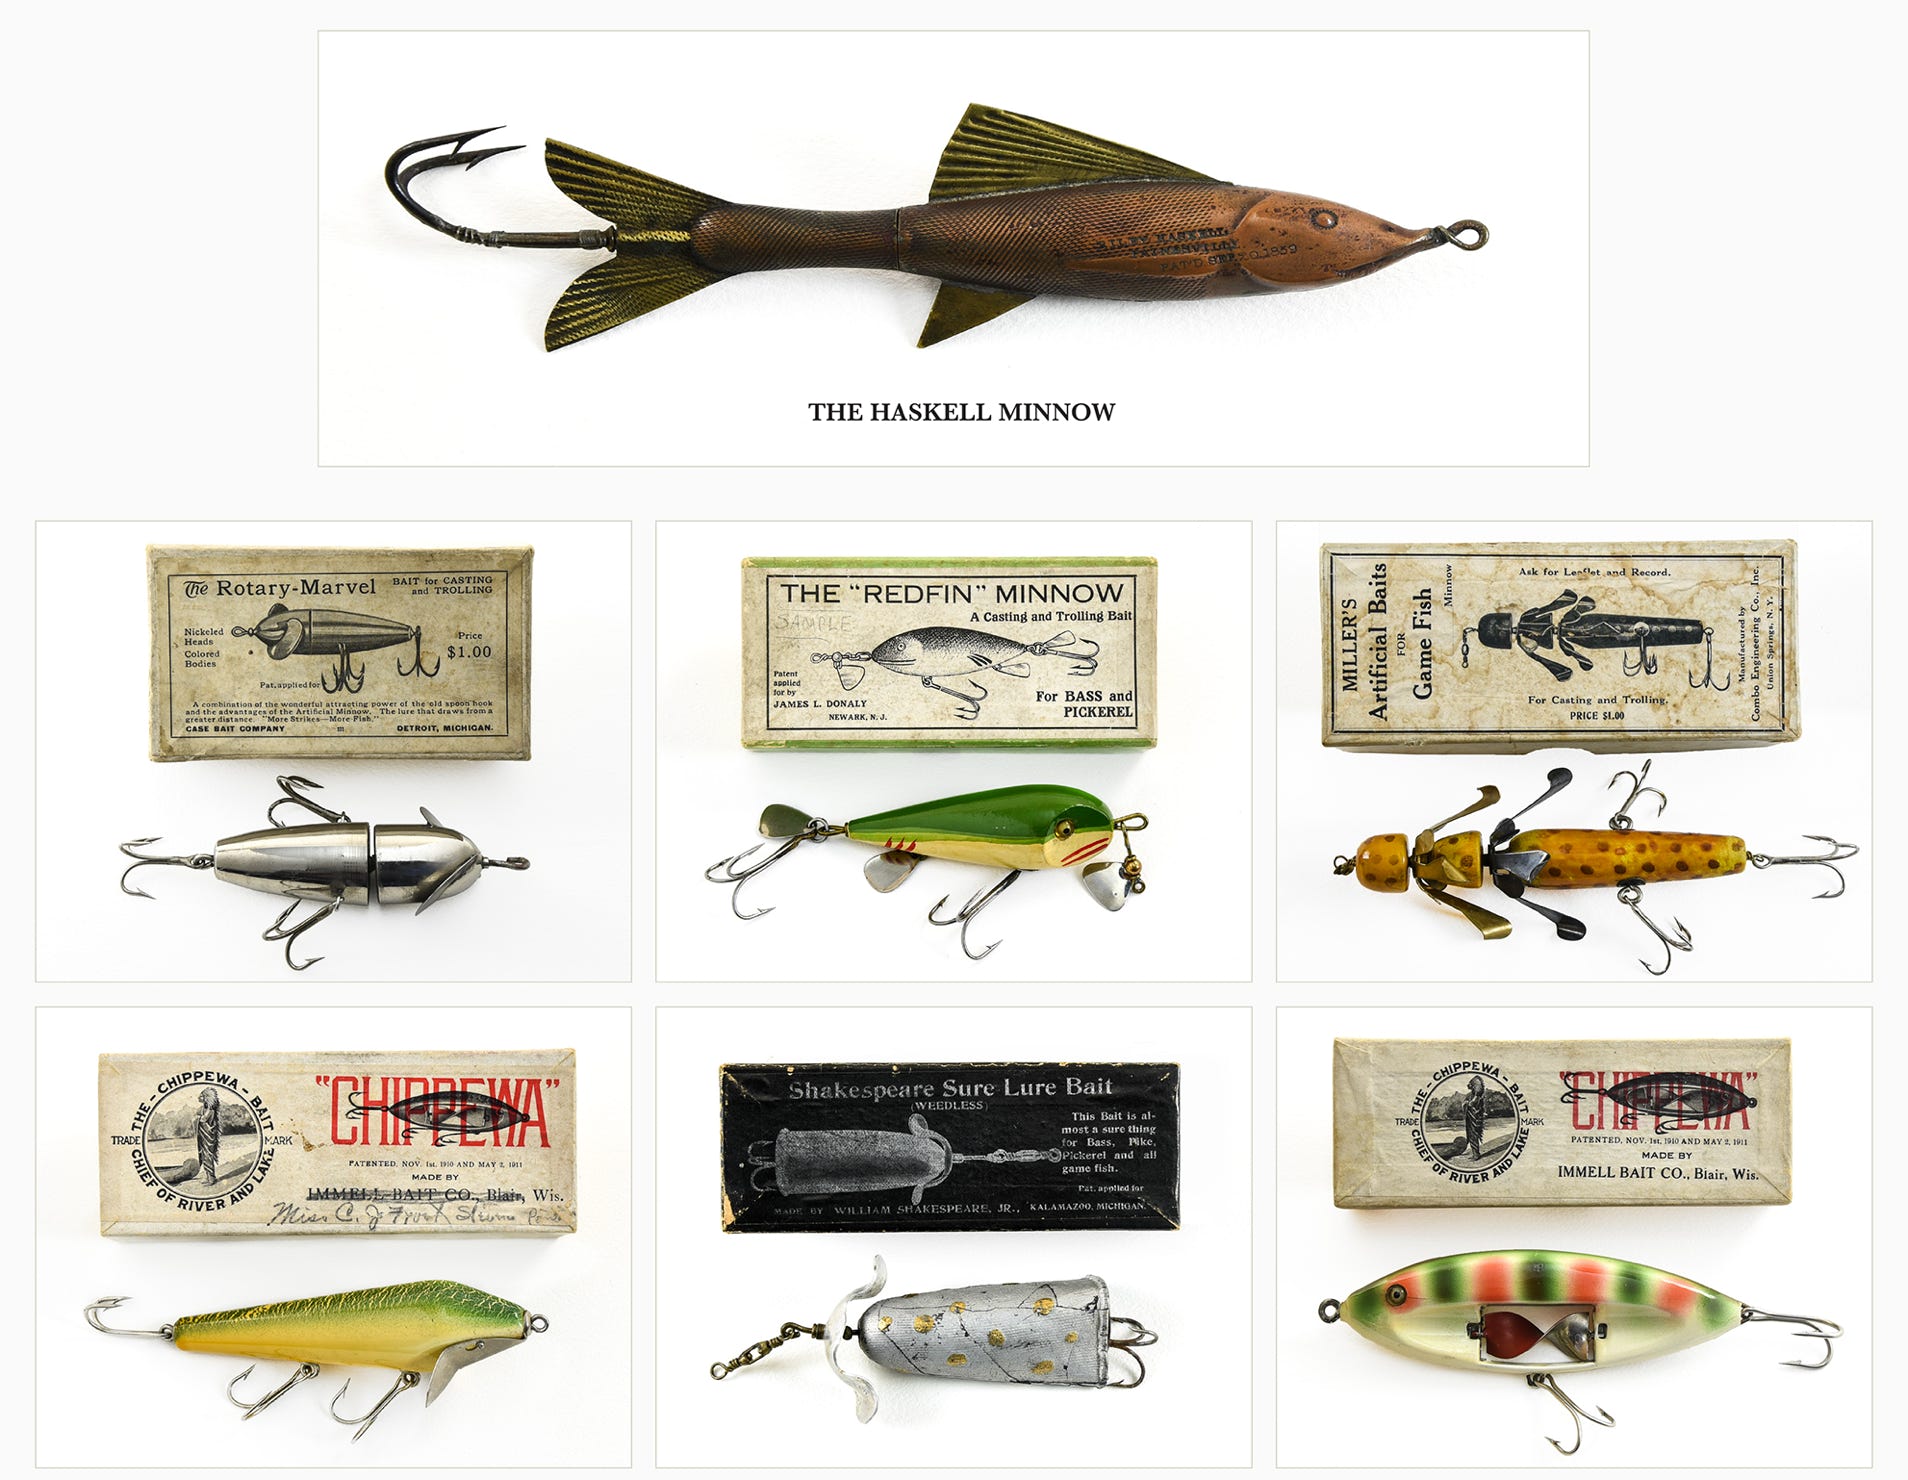 Sold at Auction: COLLECTION OF ANTIQUE FISH STRINGERS